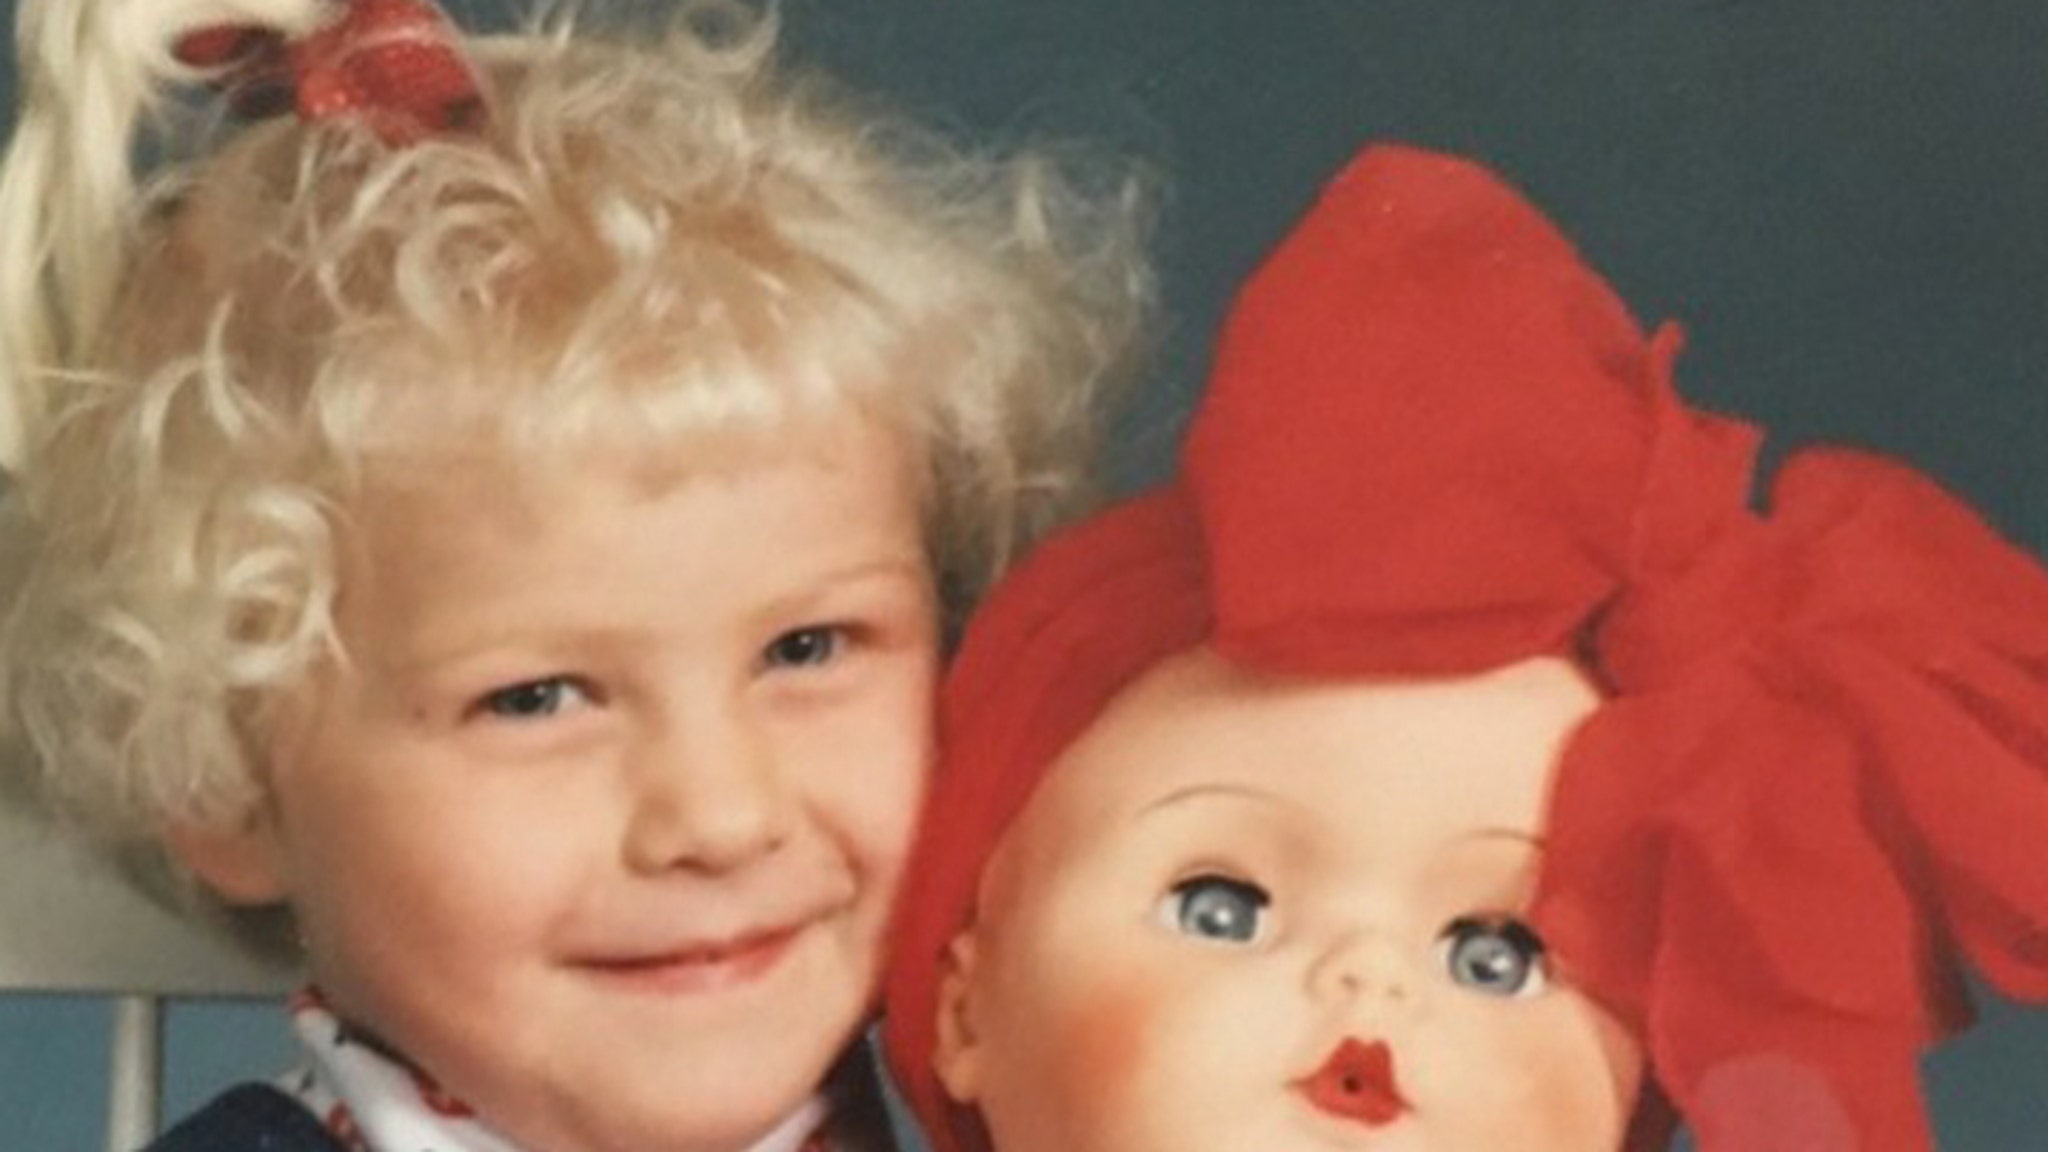 Guess Who This Doll Faced Cutie Turned Into Photos